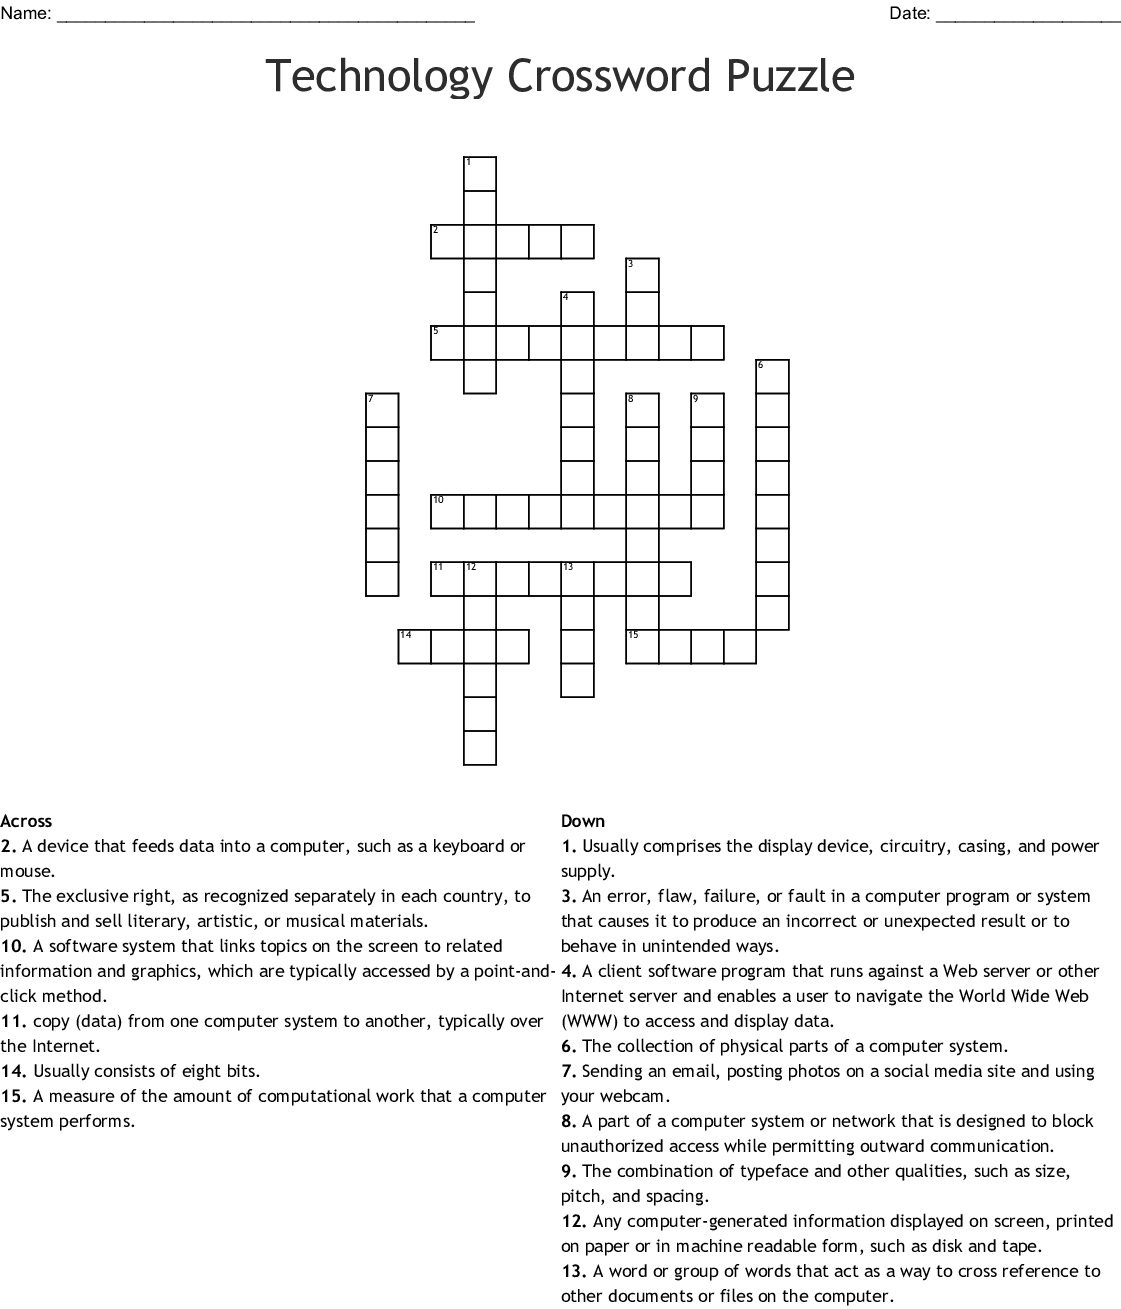 Technology Crossword Puzzle Crossword - Wordmint - Printable Computer Crossword Puzzles With Answers